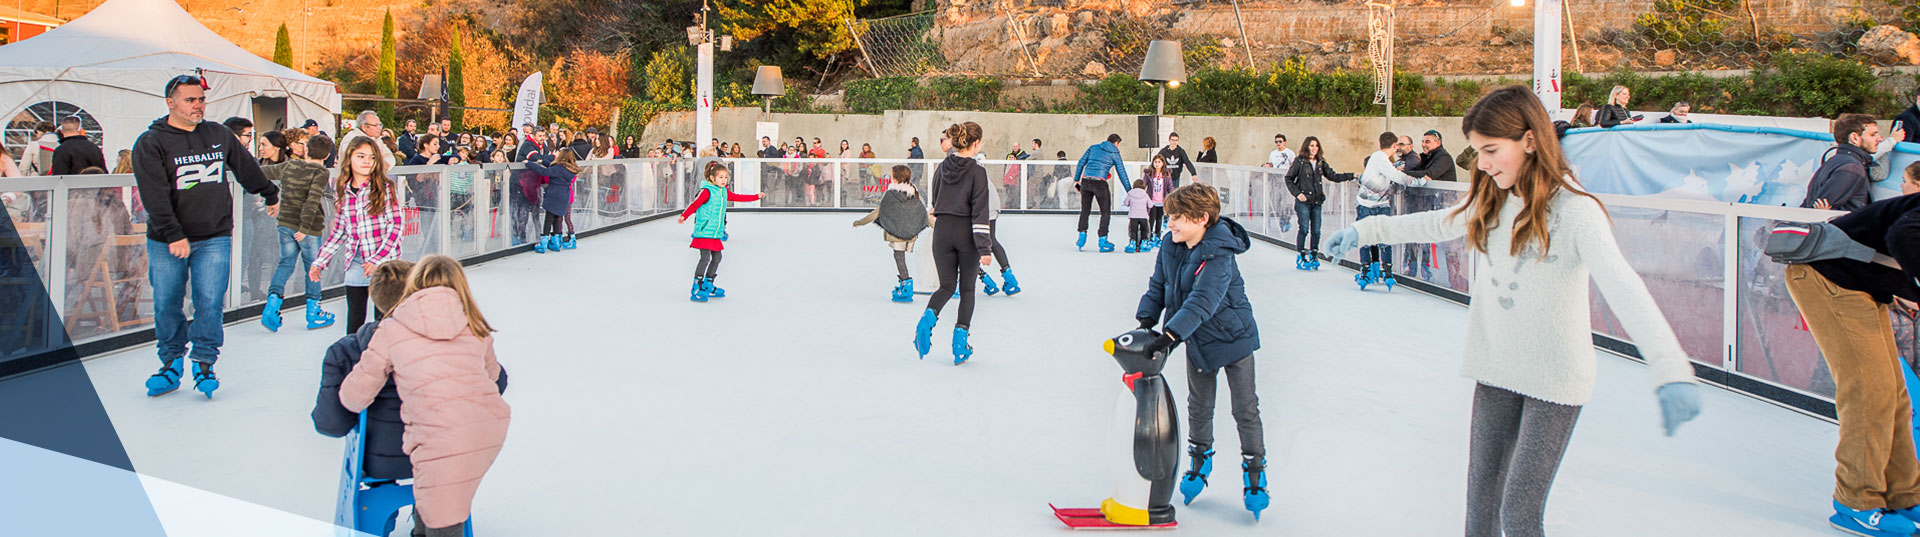 Leisure synthetic ice rink